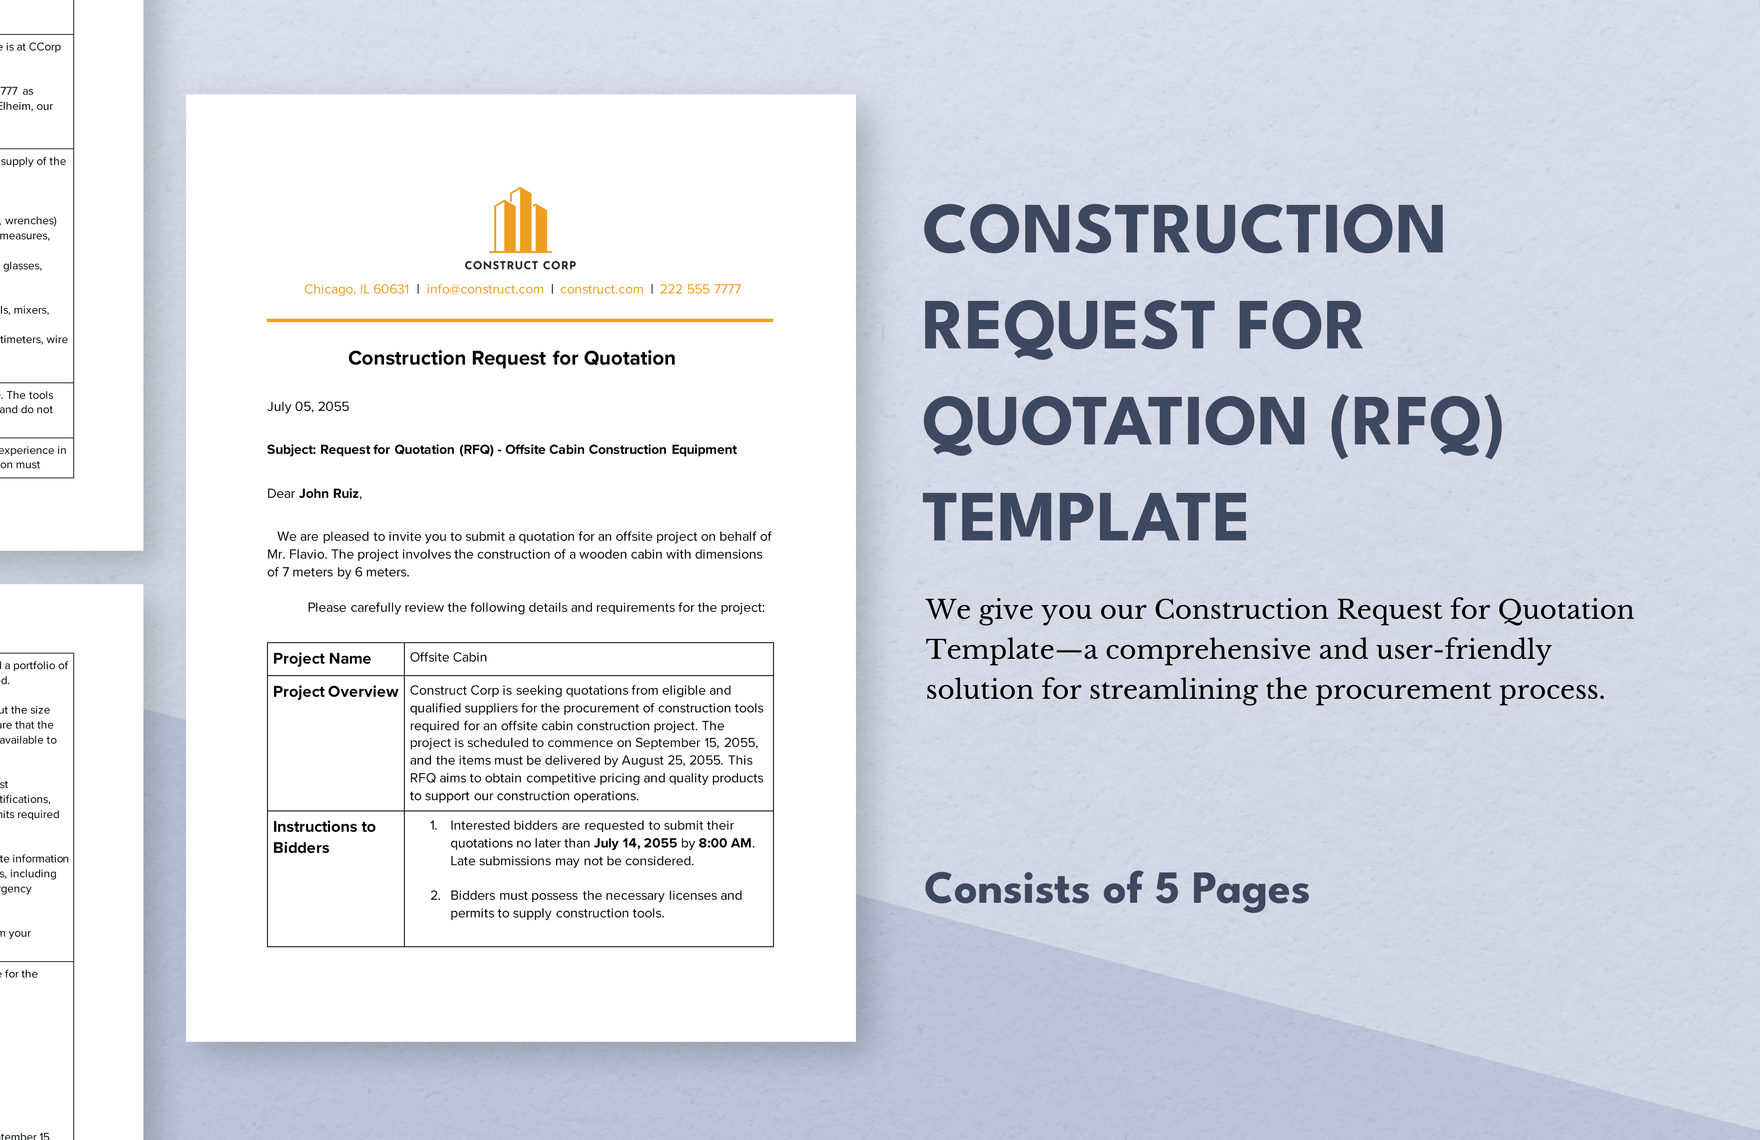 Construction Request for Quotation (RFQ) Template